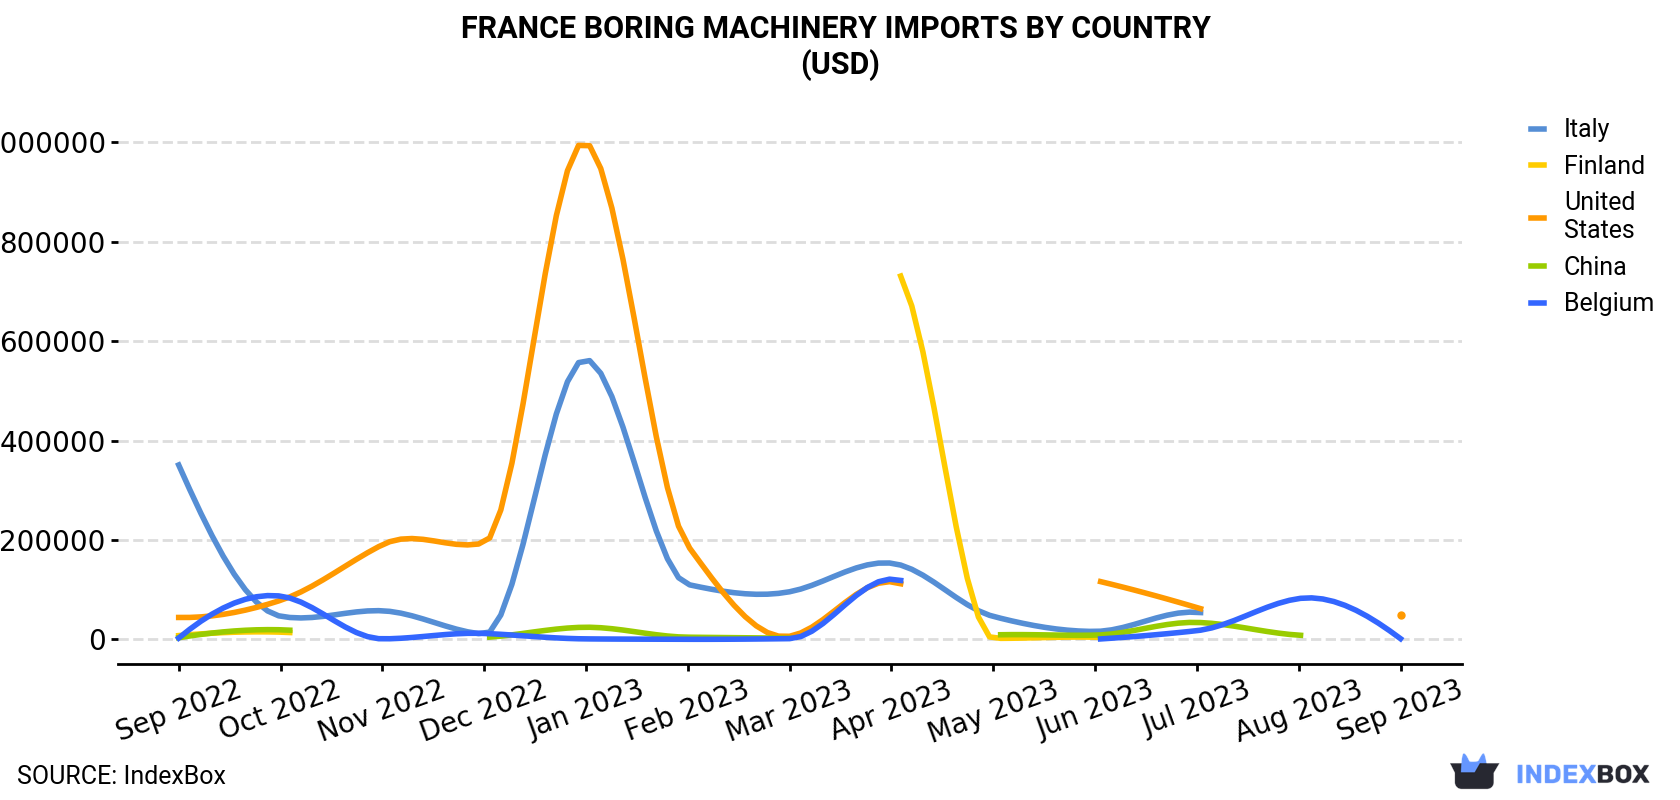 France Boring Machinery Imports By Country (USD)